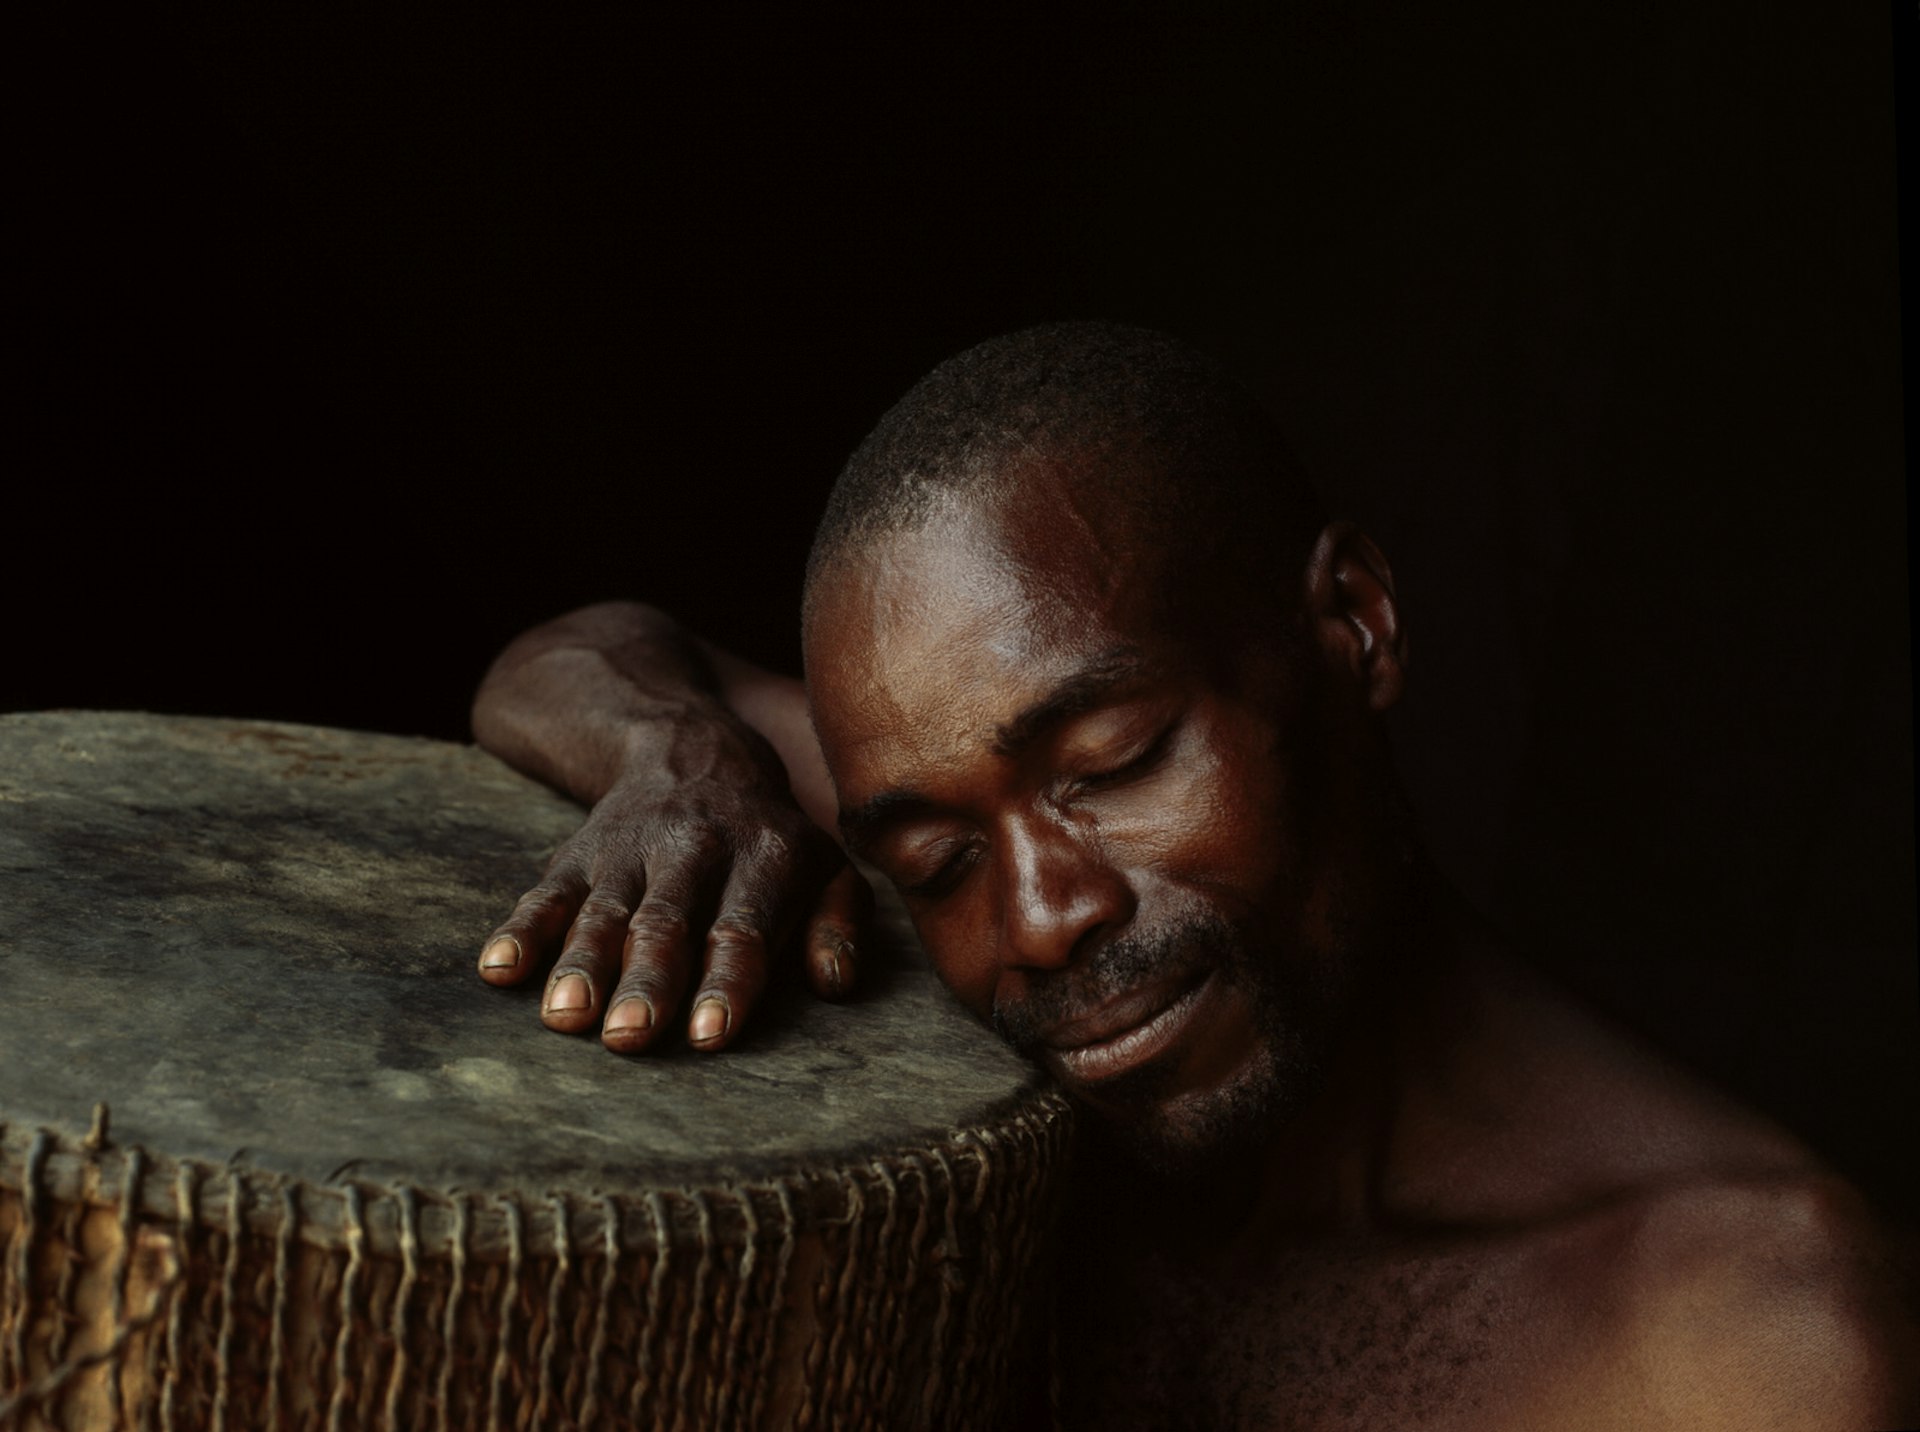 A Batwa man sleeps with his head on his drum; he has a peaceful smile on his face